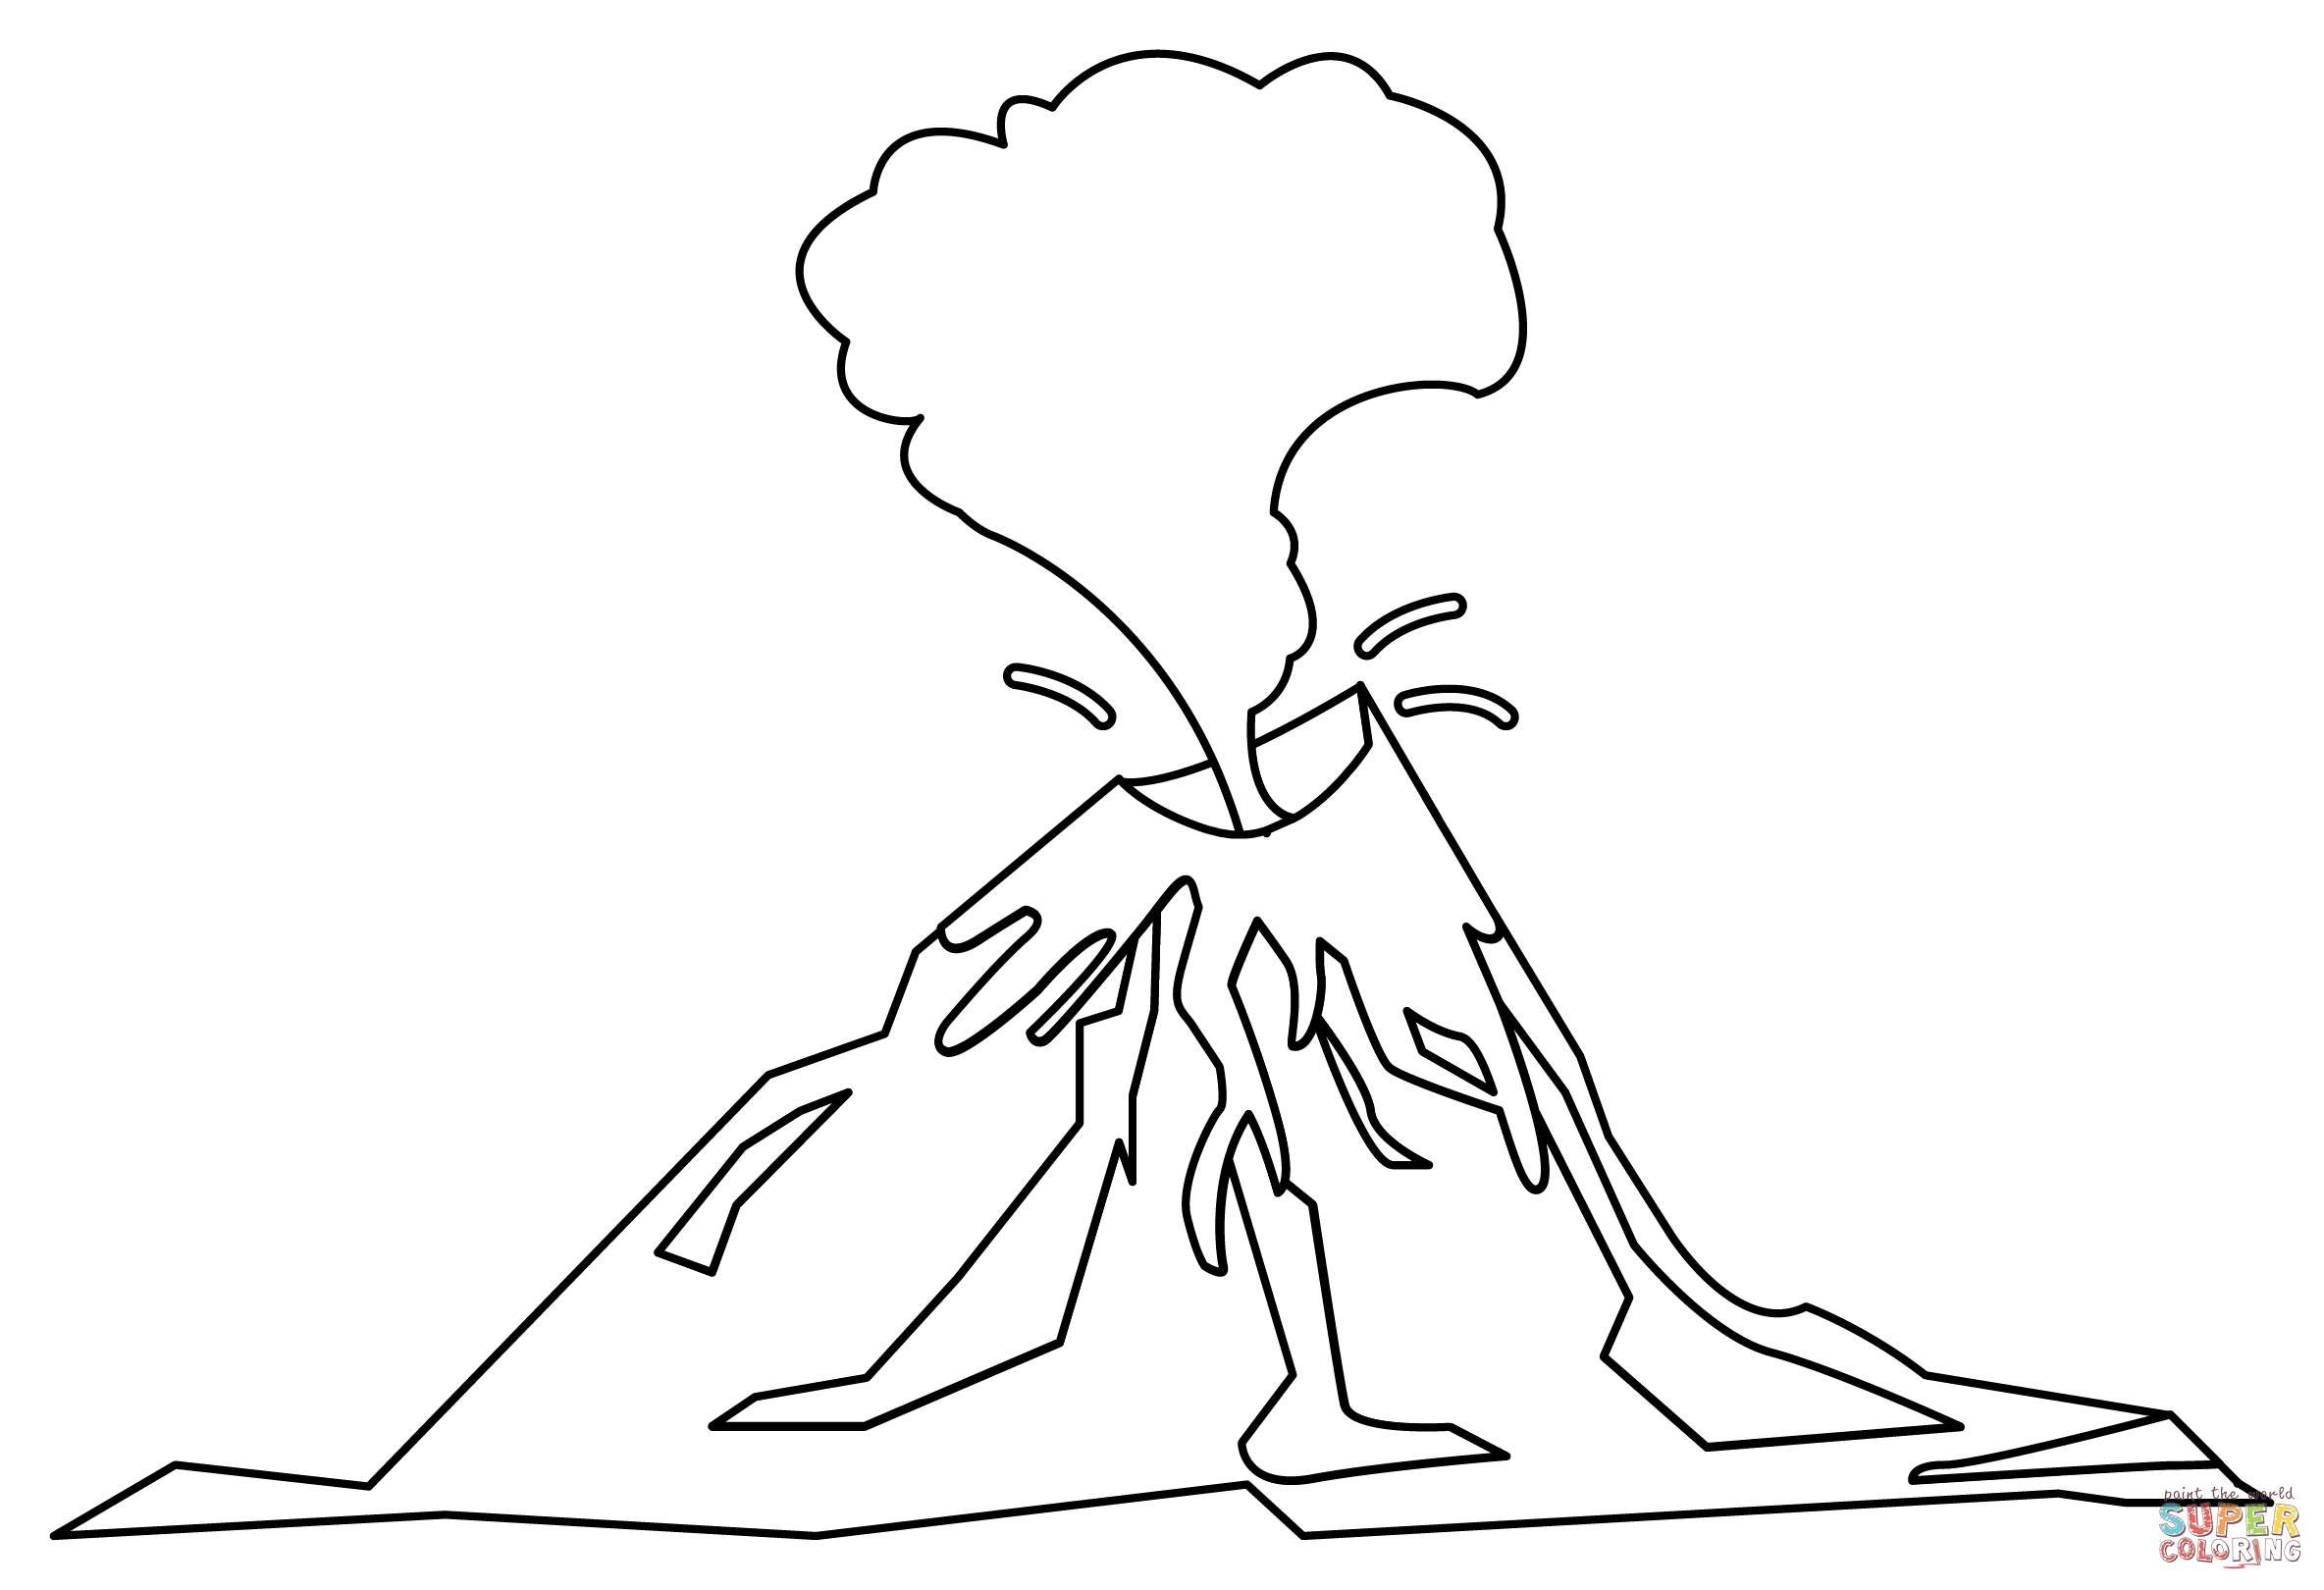 Volcano coloring page free printable coloring pages